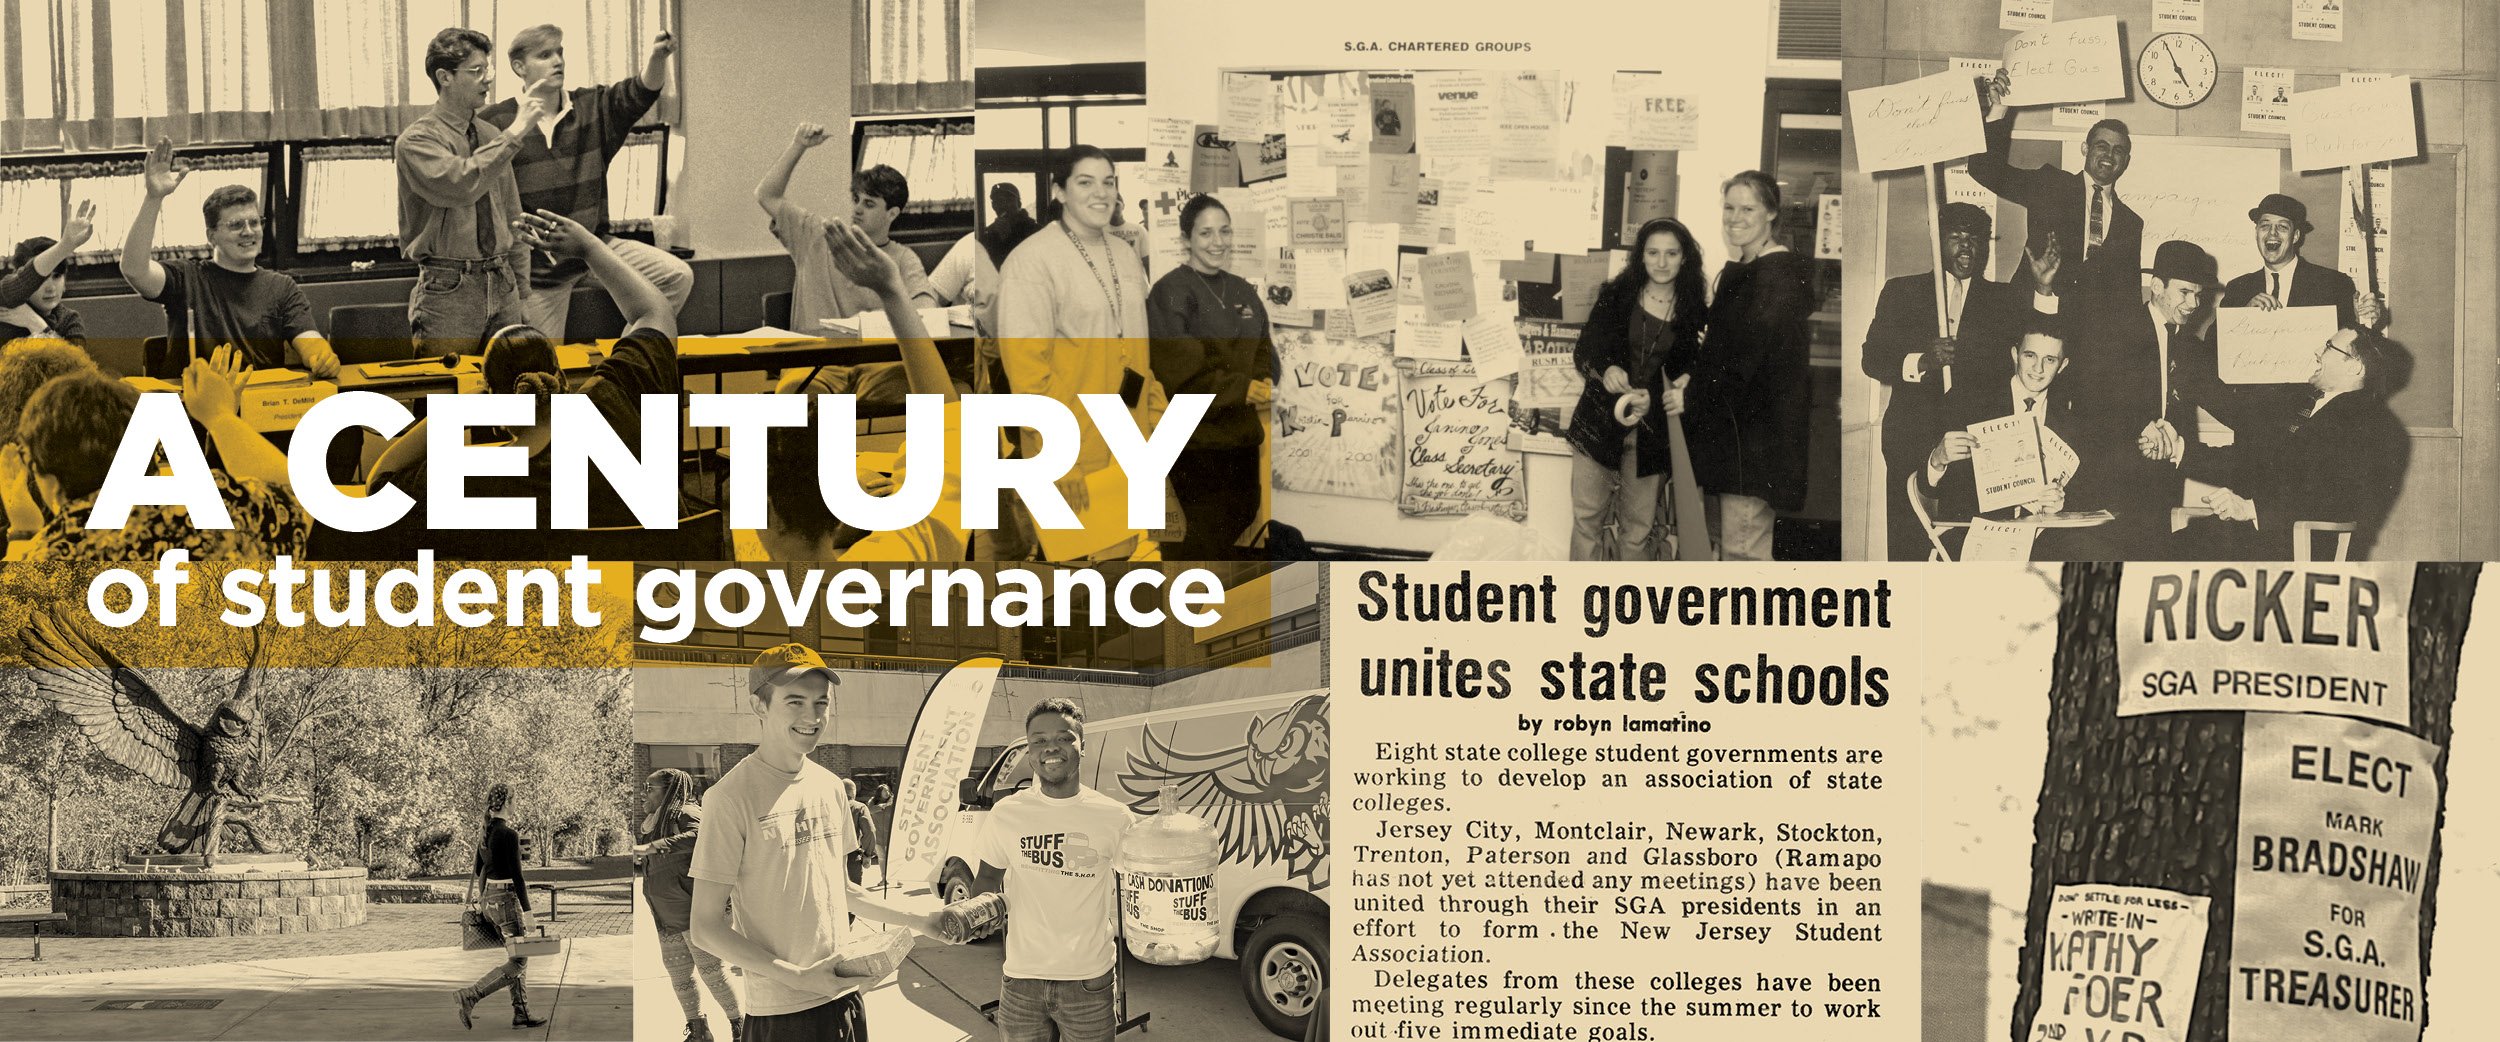 A century of student governance